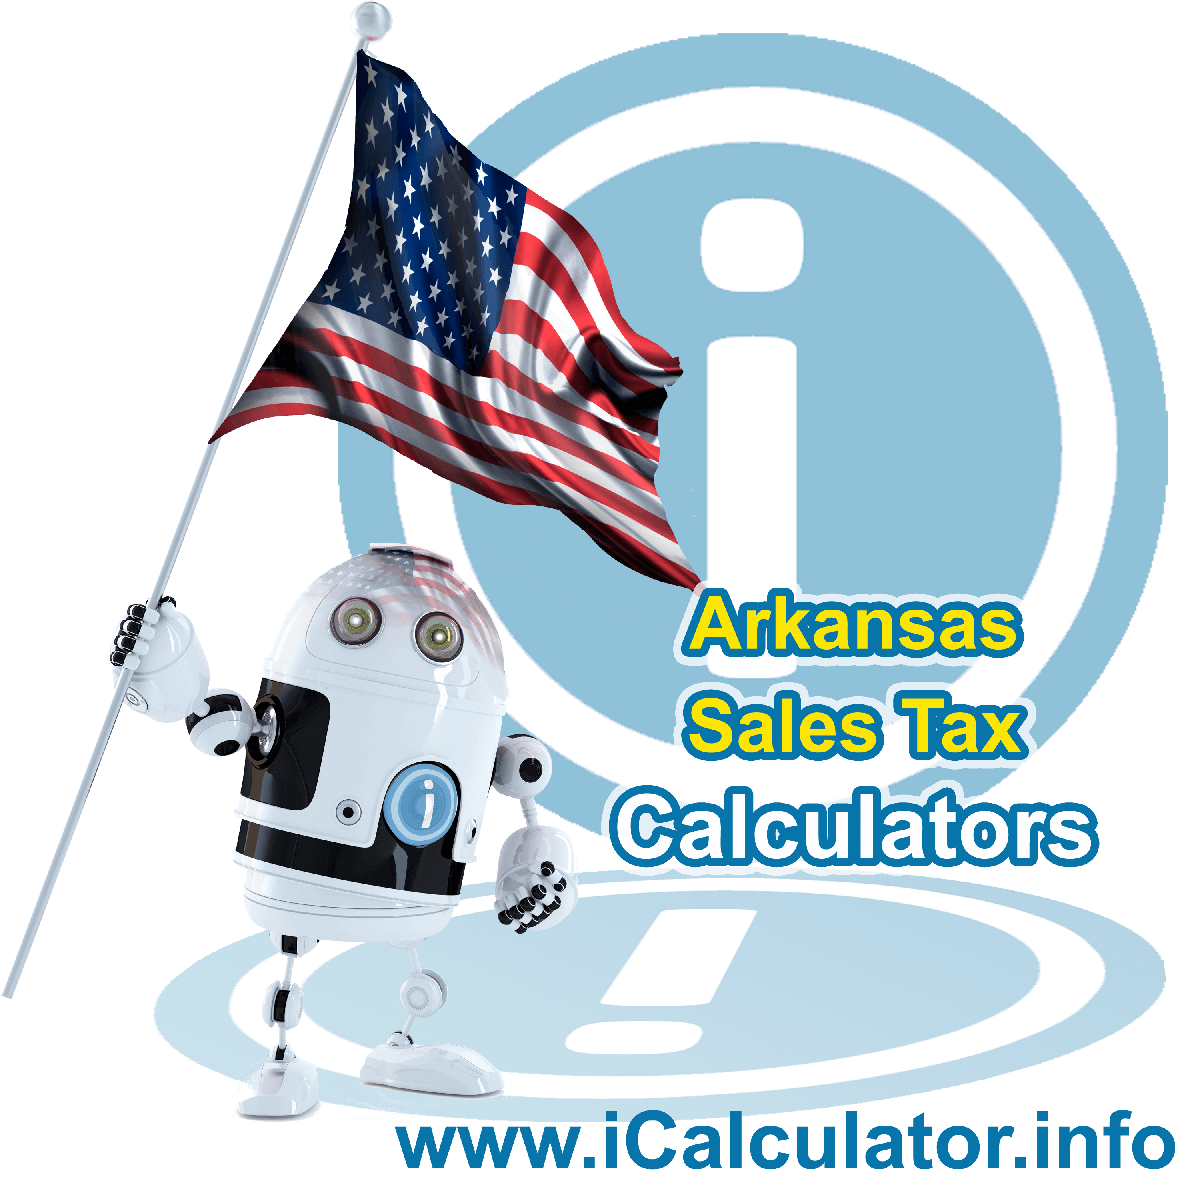 Swifton Sales Rates: This image illustrates a calculator robot calculating Swifton sales tax manually using the Swifton Sales Tax Formula. You can use this information to calculate Swifton Sales Tax manually or use the Swifton Sales Tax Calculator to calculate sales tax online.